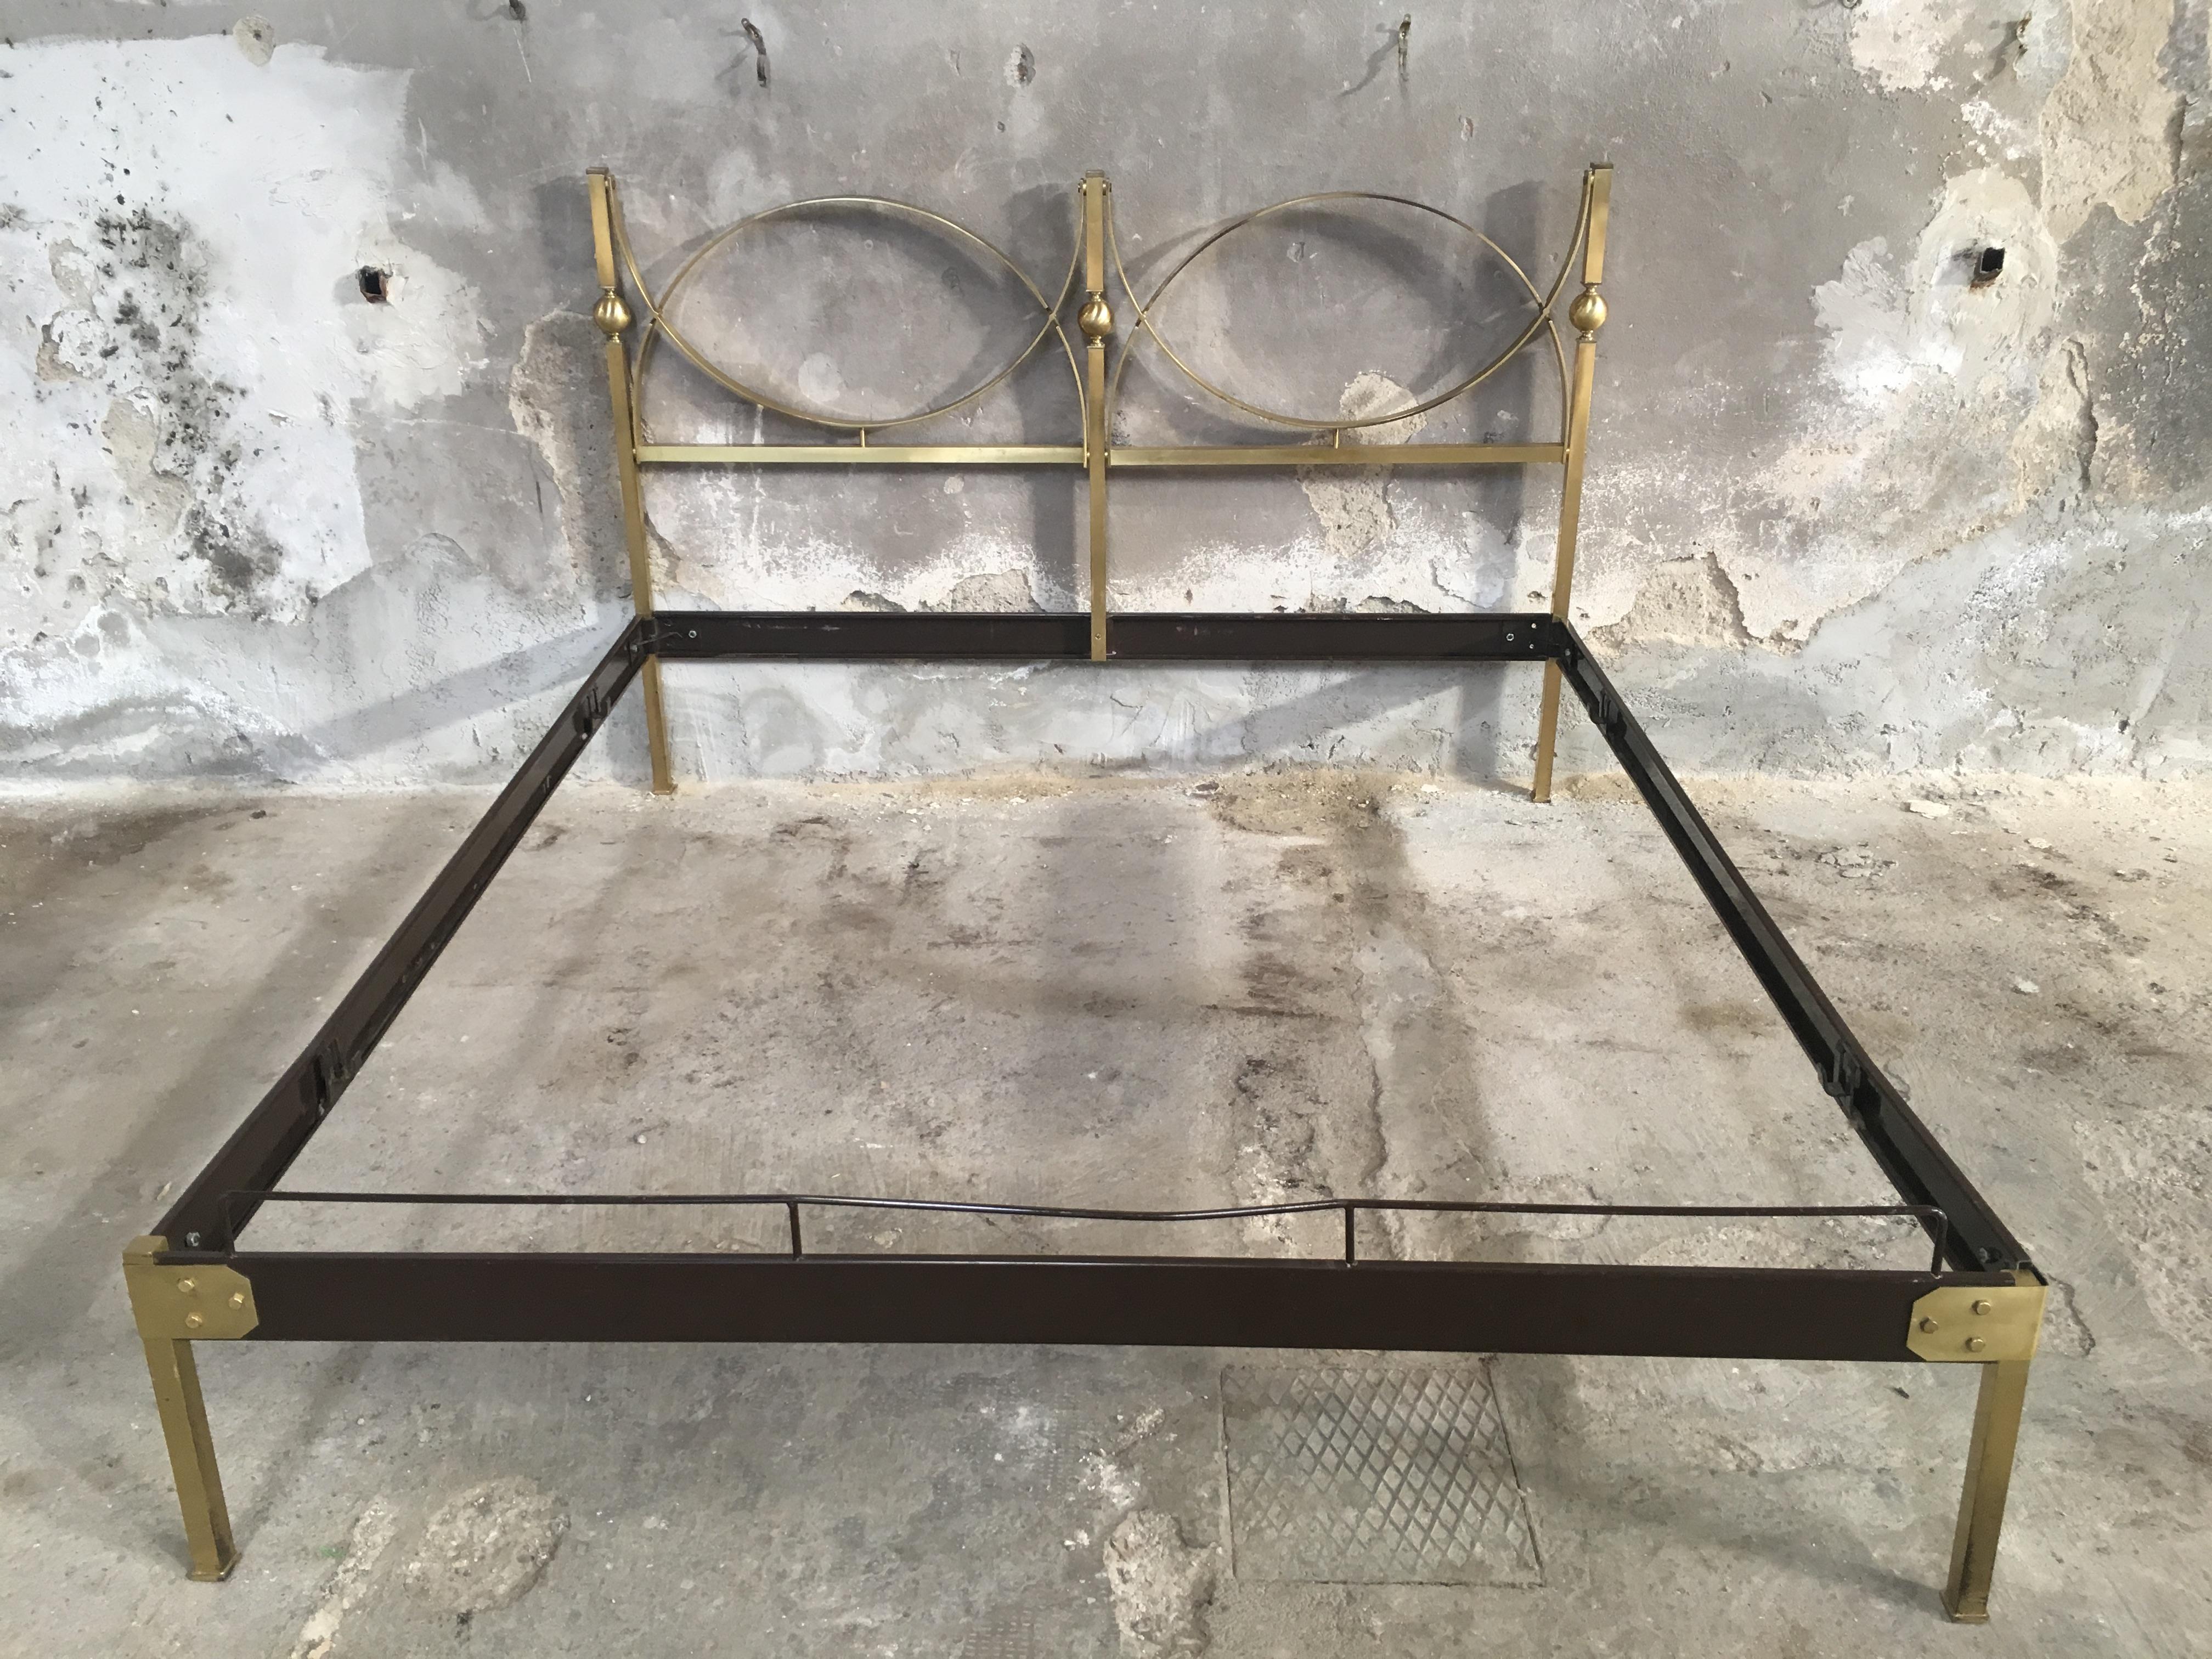 Mid-Century Modern Italian gilt brass bed with lacquered metal structure, 1960s
The bed needs a mattress of cm.170 x 190.